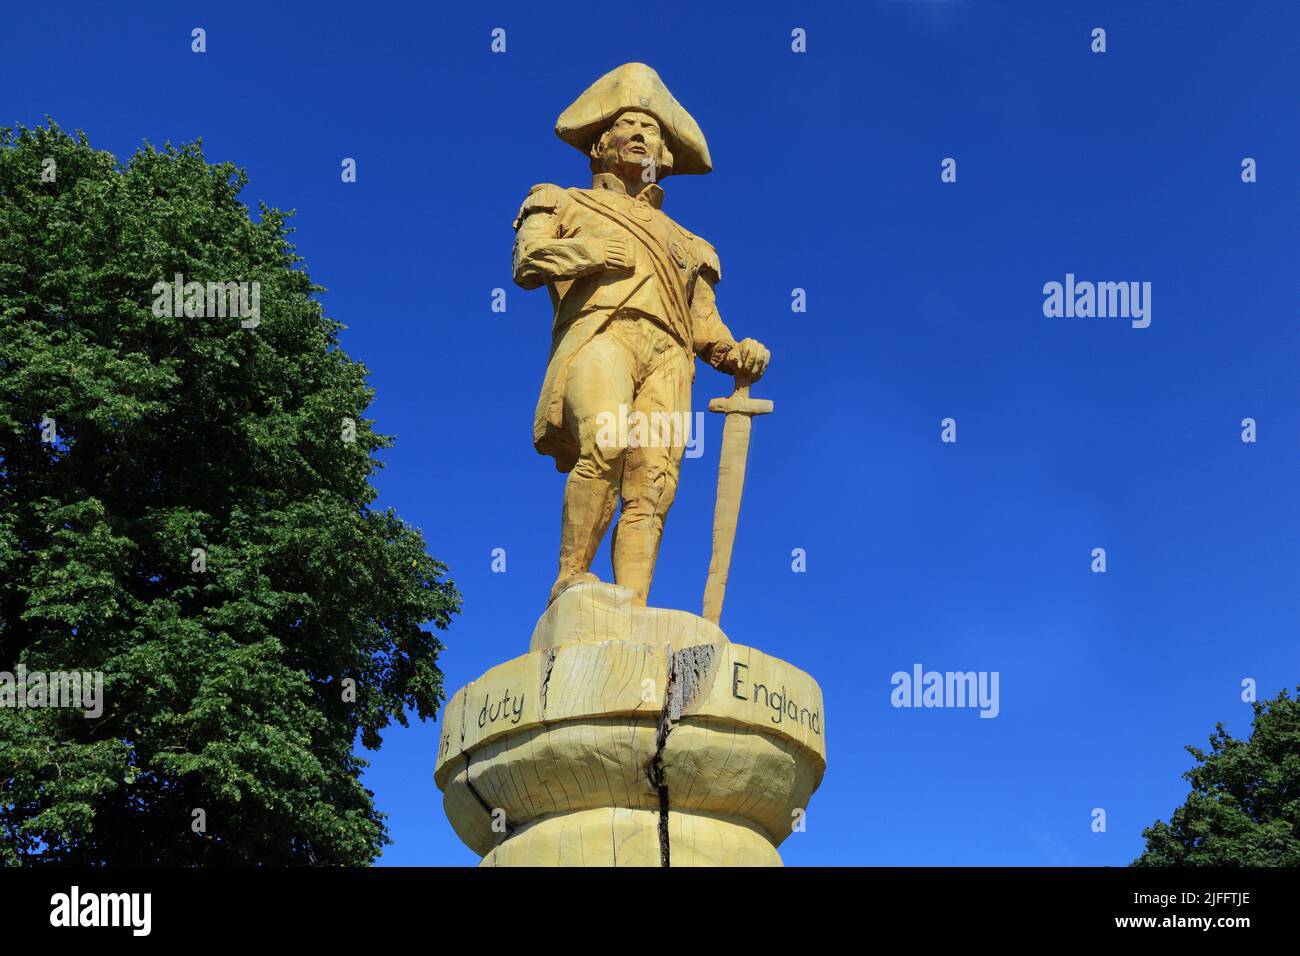 Admiral Lord Horatio Nelson, wood sculpture, carving, Burnham Thorpe,  by chainsaw artist Henry Hepworth-Smith, from Norwegian Maple tree trunk Stock Photo